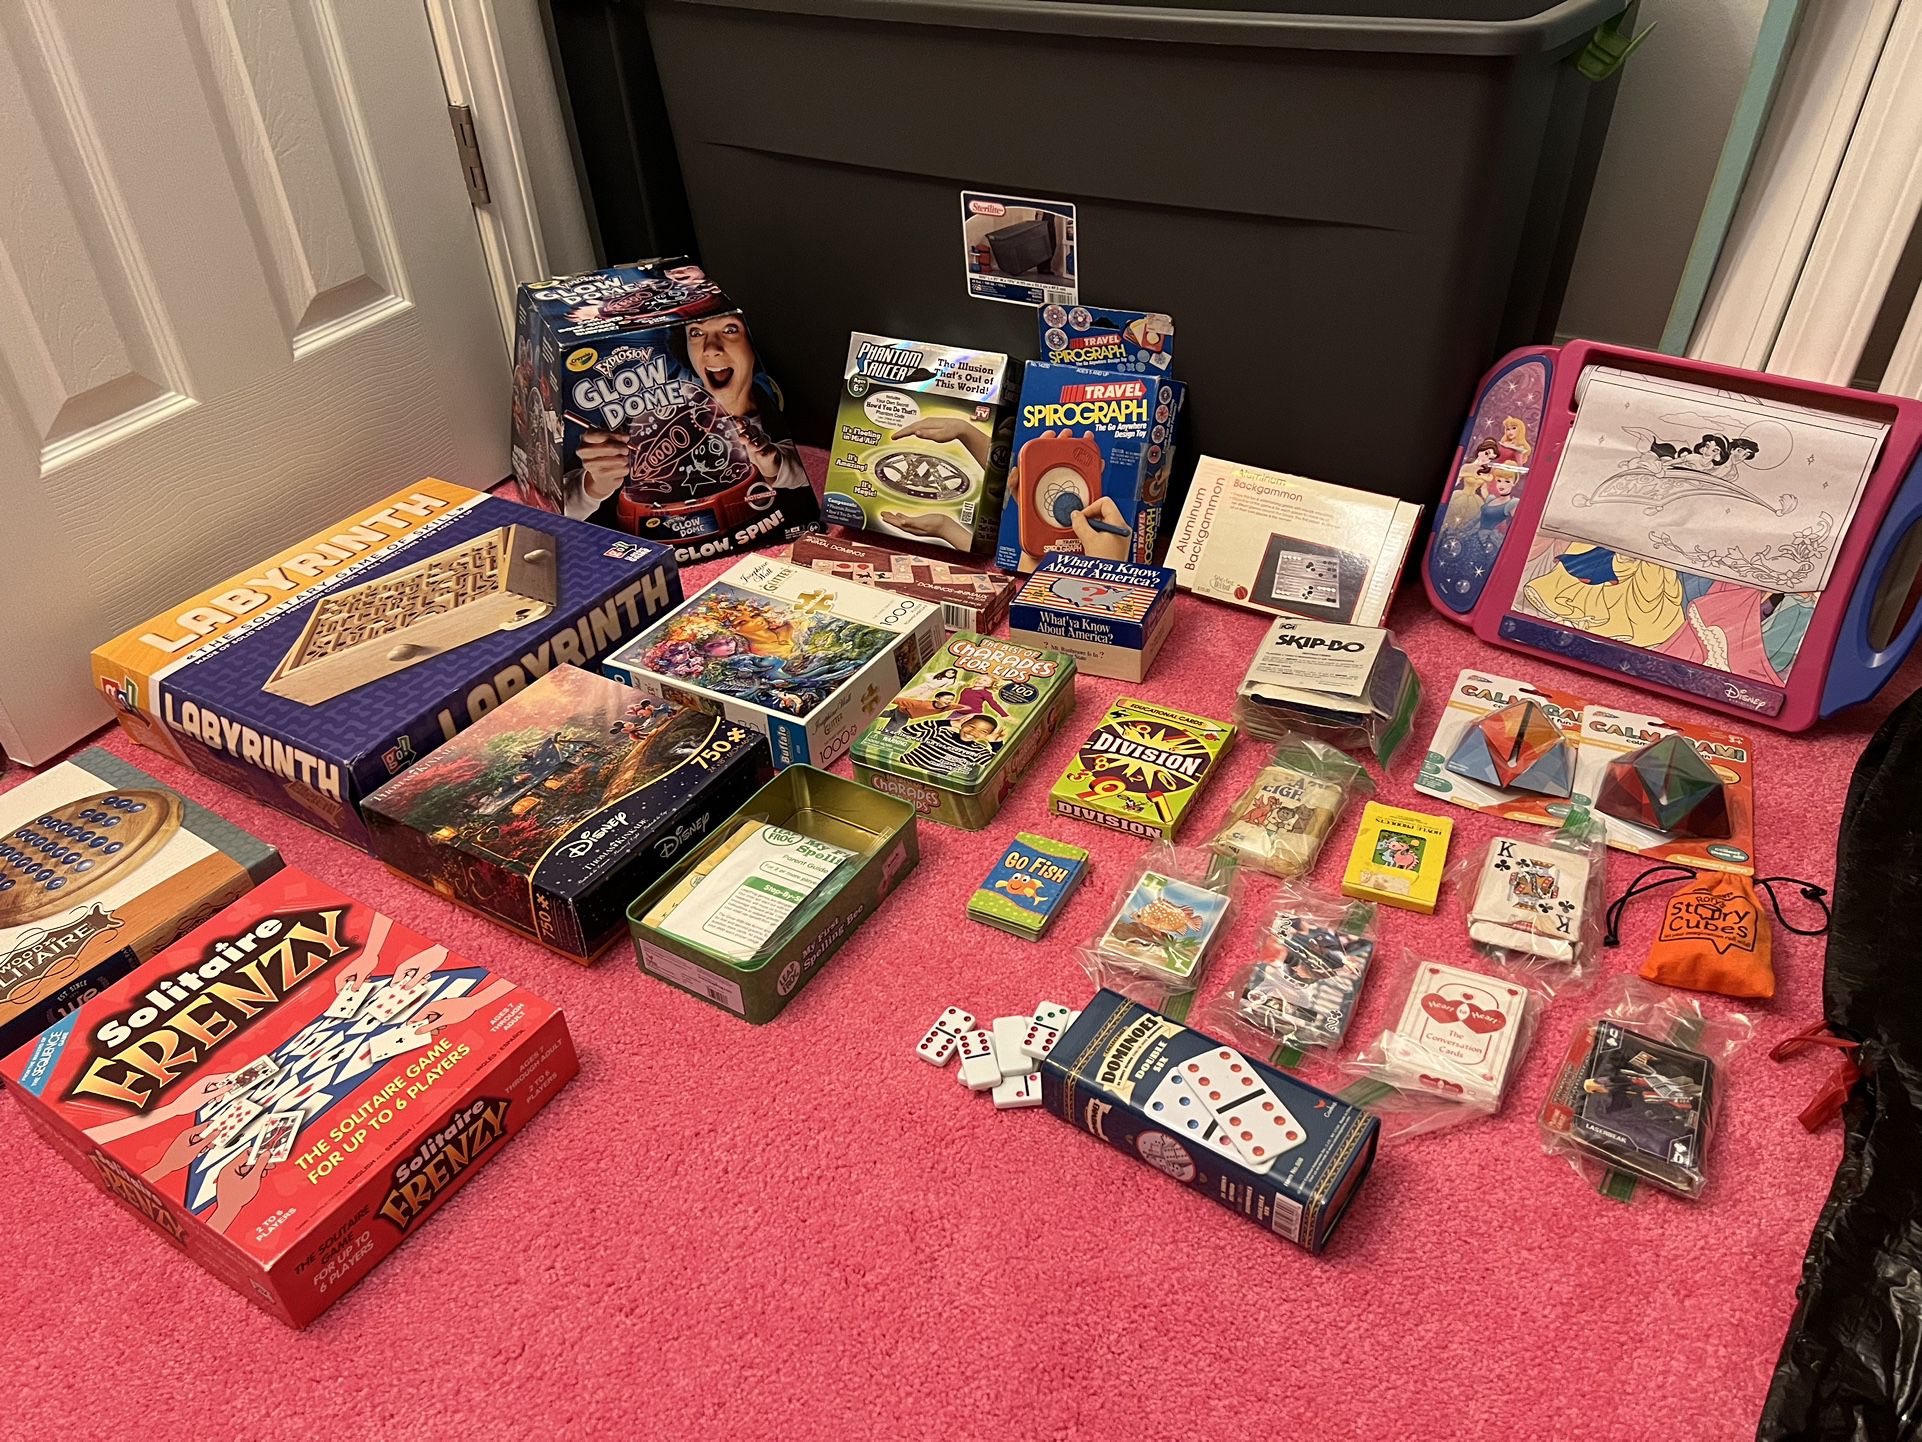 Lot of Games, Board Games, Children and Adult